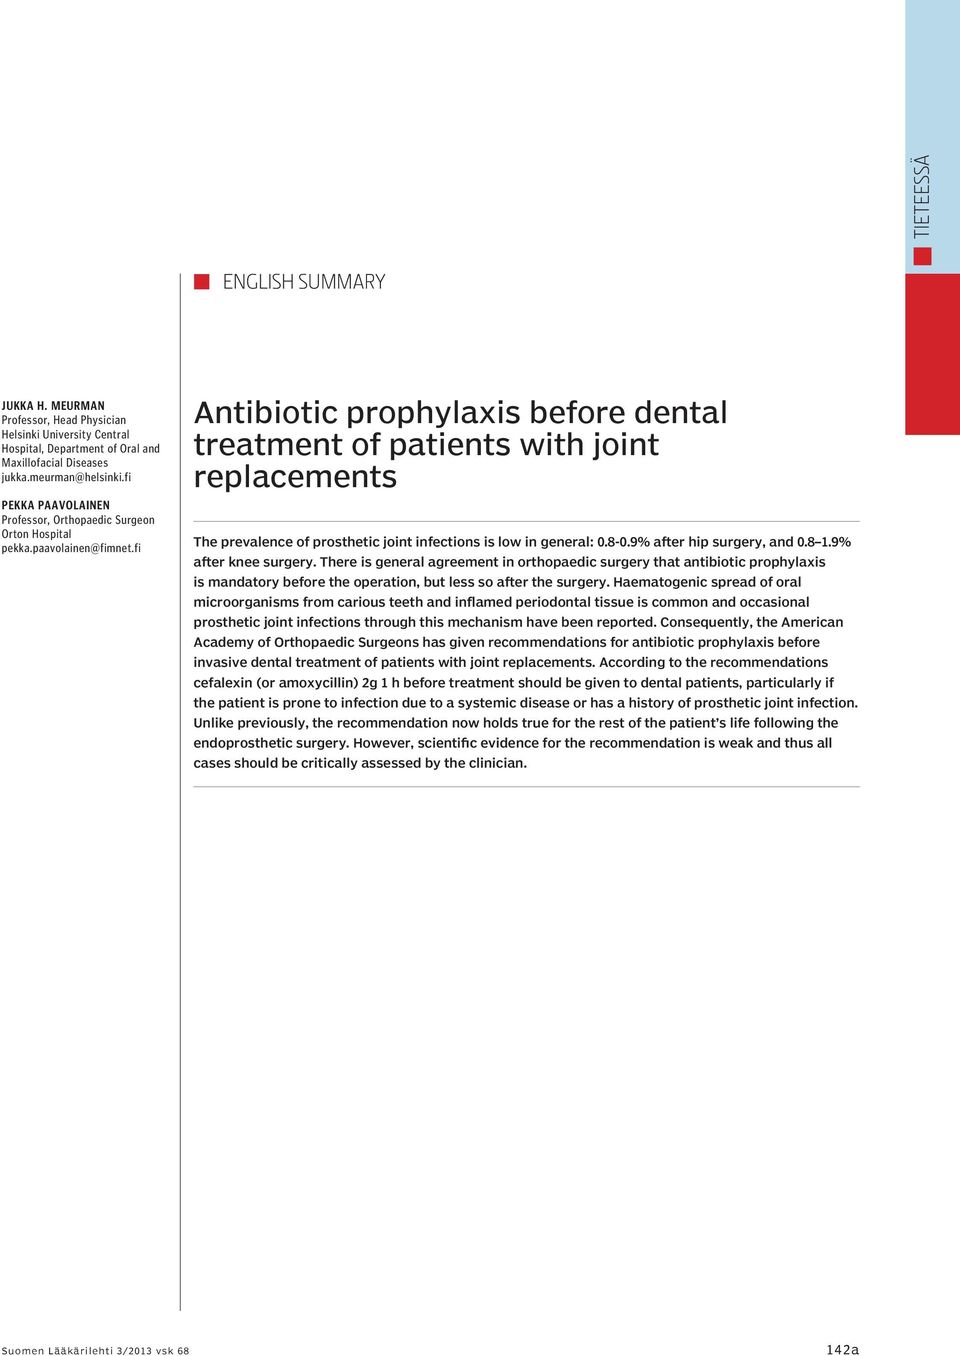 fi Antibiotic prophylaxis before dental treatment of patients with joint replacements The prevalence of prosthetic joint infections is low in general: 0.8-0.9% after hip surgery, and 0.8 1.